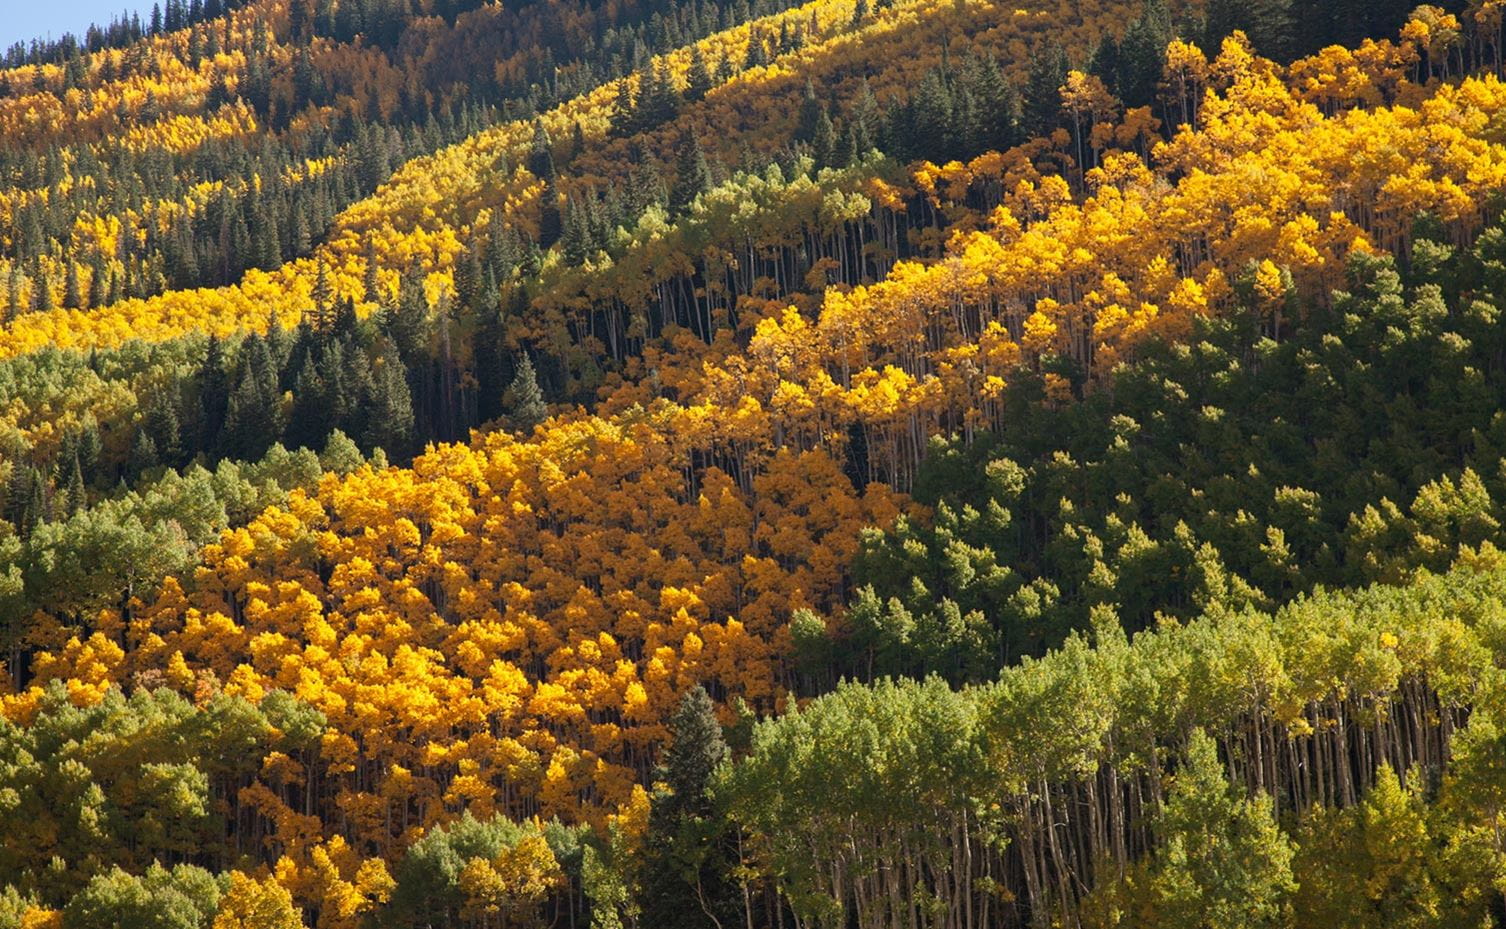 A spectacular stand of aspen trees create a spectrum of fall color near Ashcroft, Colorado.